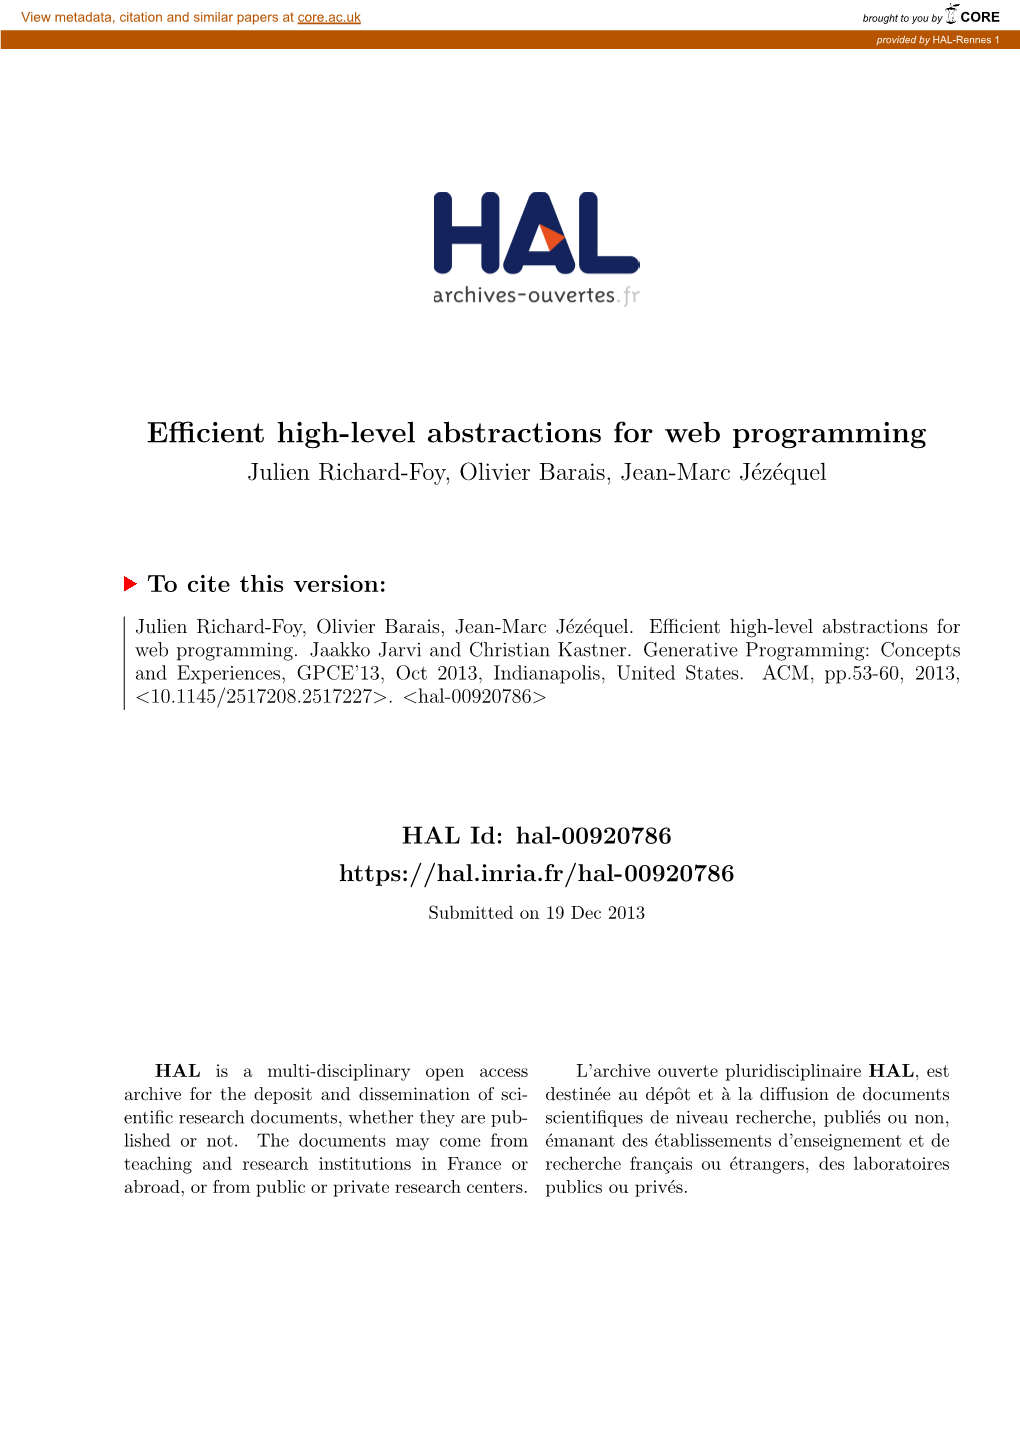 Efficient High-Level Abstractions for Web Programming